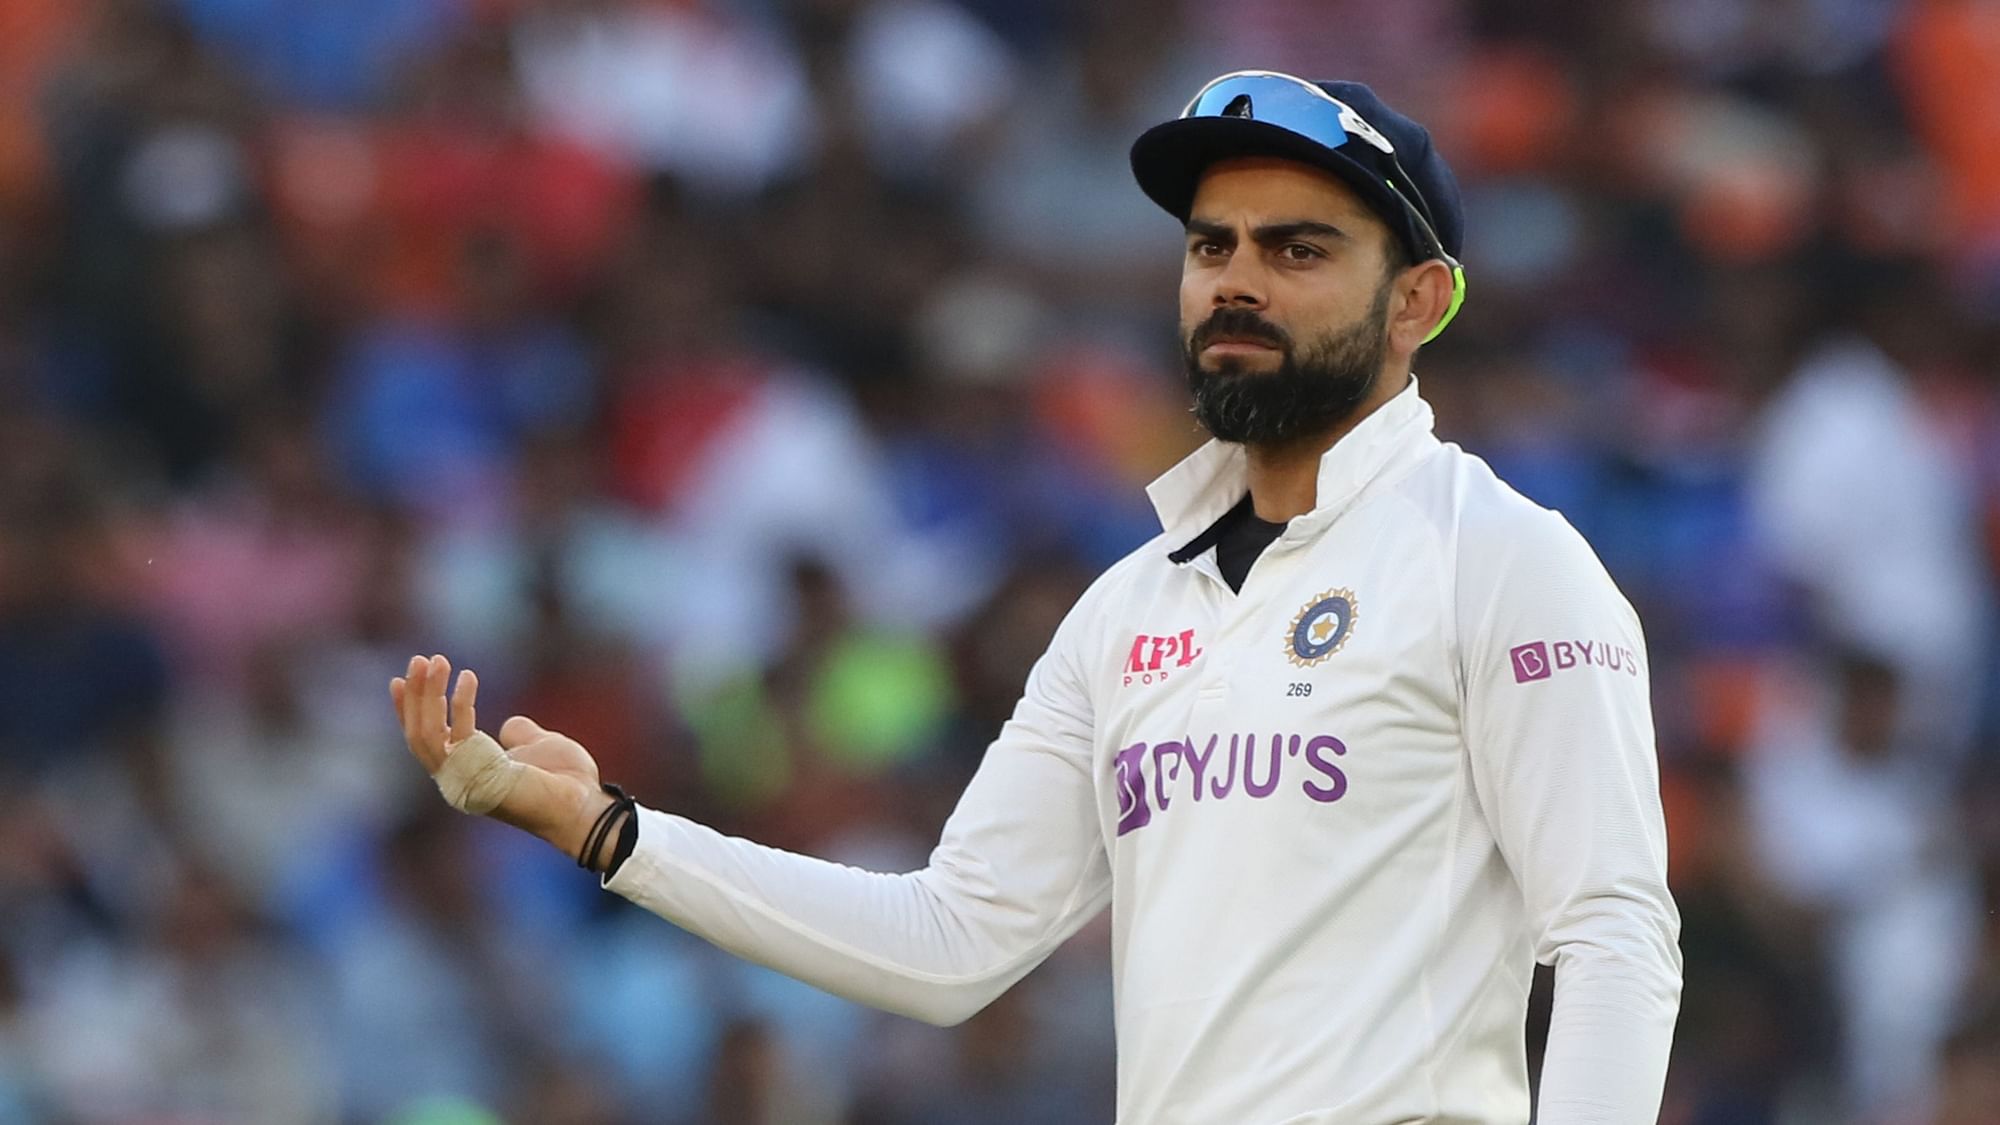 Here’s what India need to do to qualify for the World Test Championship final.